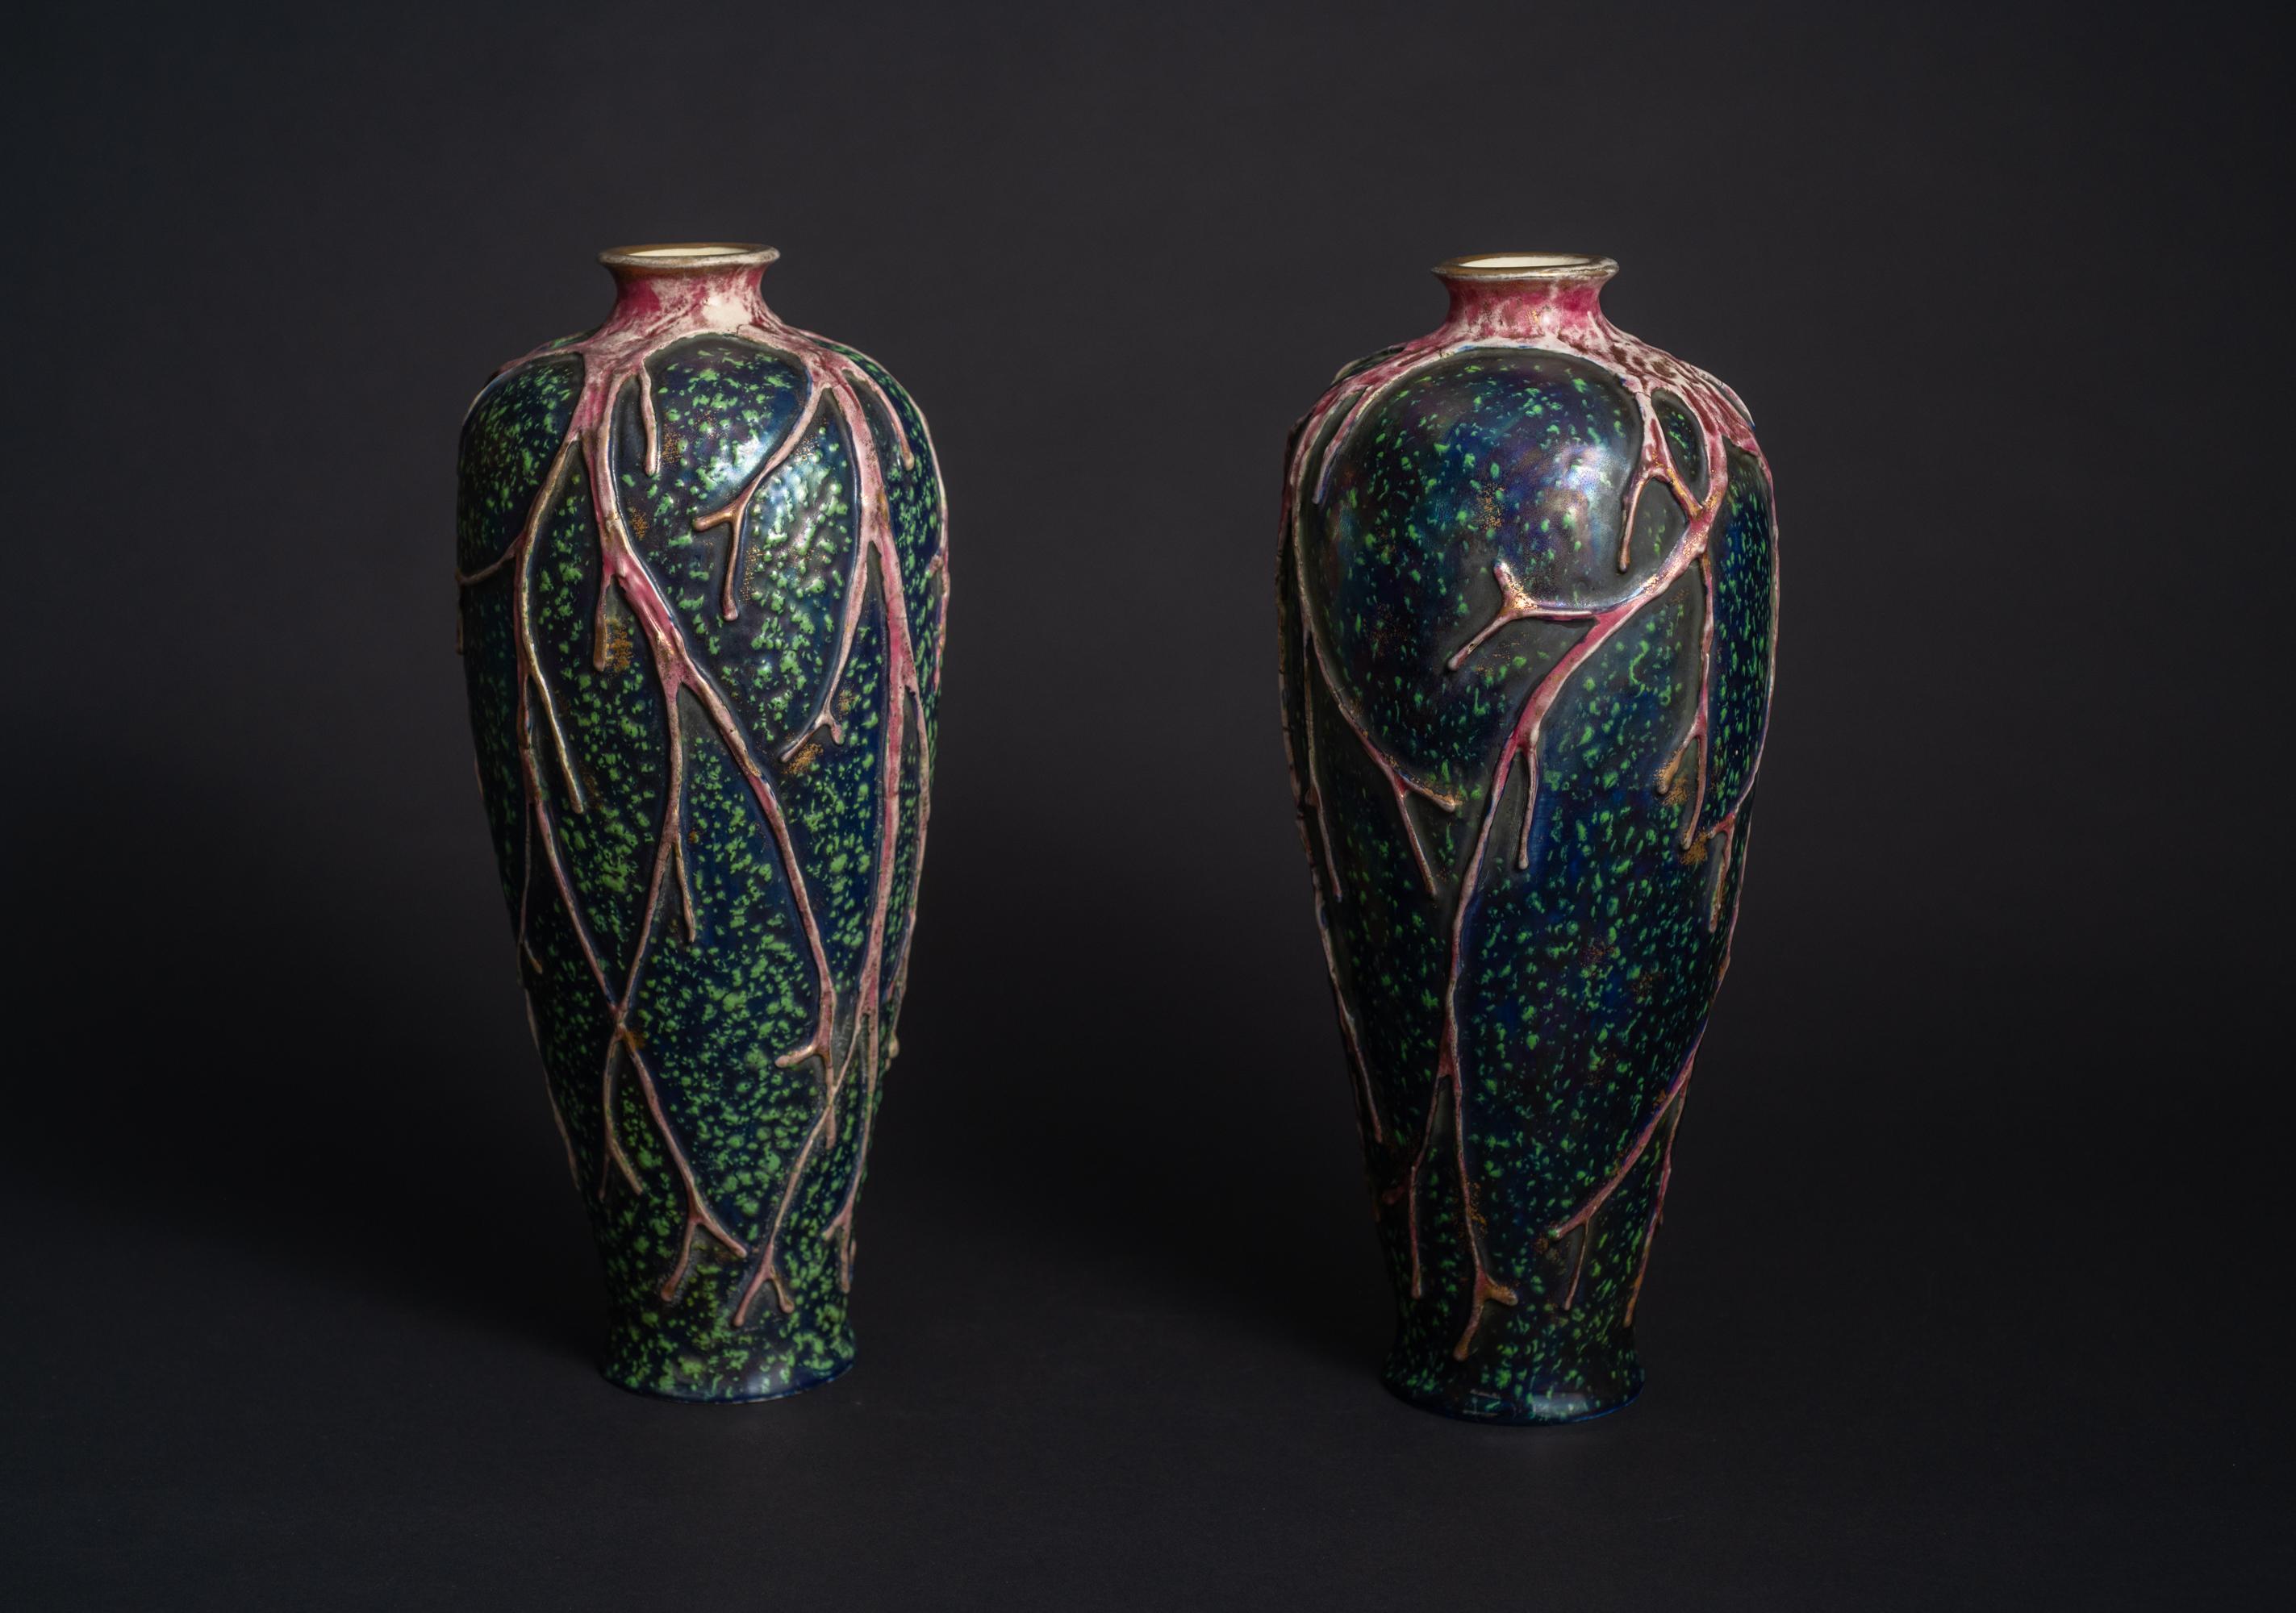 Austrian Pair of Art Nouveau Iridescent Vases with Stylized Seaweed Motif by RStK Amphora